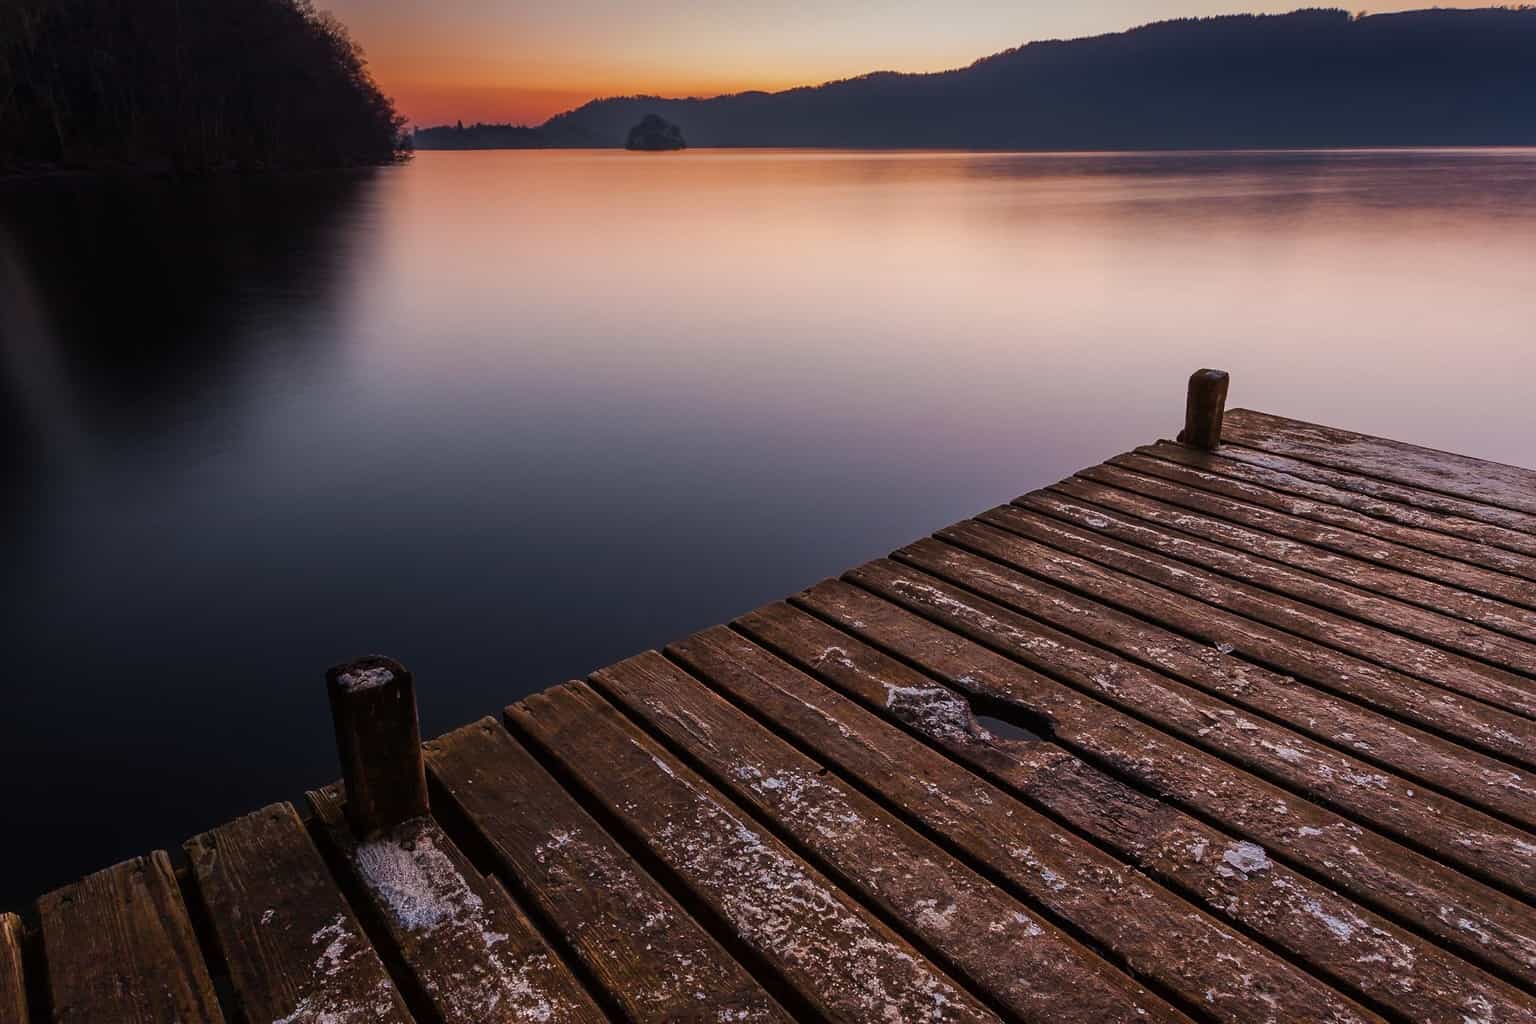  A stunning sunset over a flat calm Lake Windermere - Landscape Photography by Rick McEvoy 